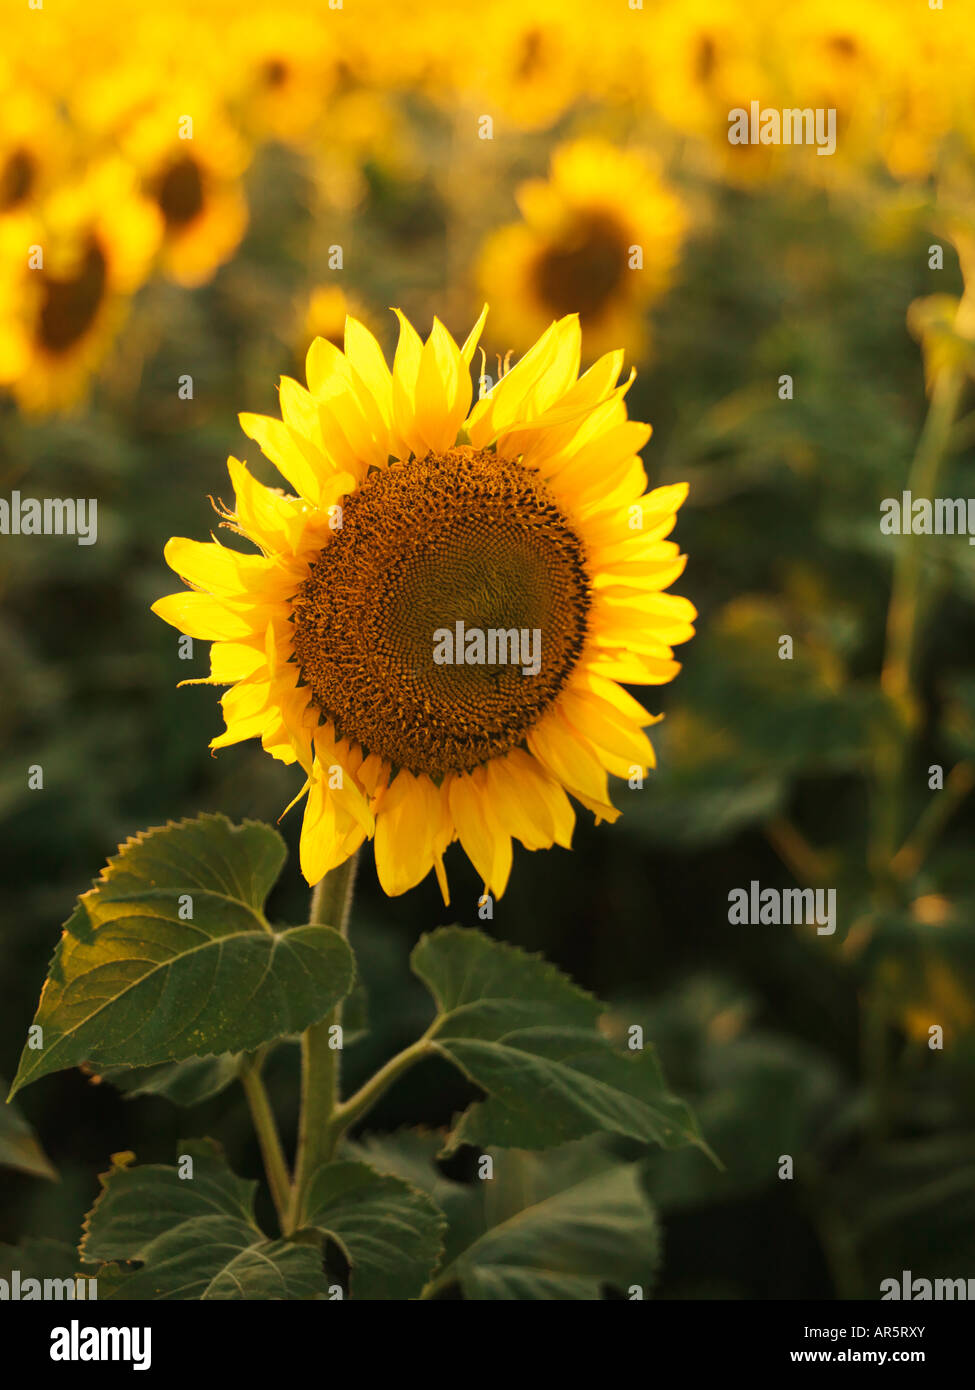 Sunflower in field with others Stock Photo